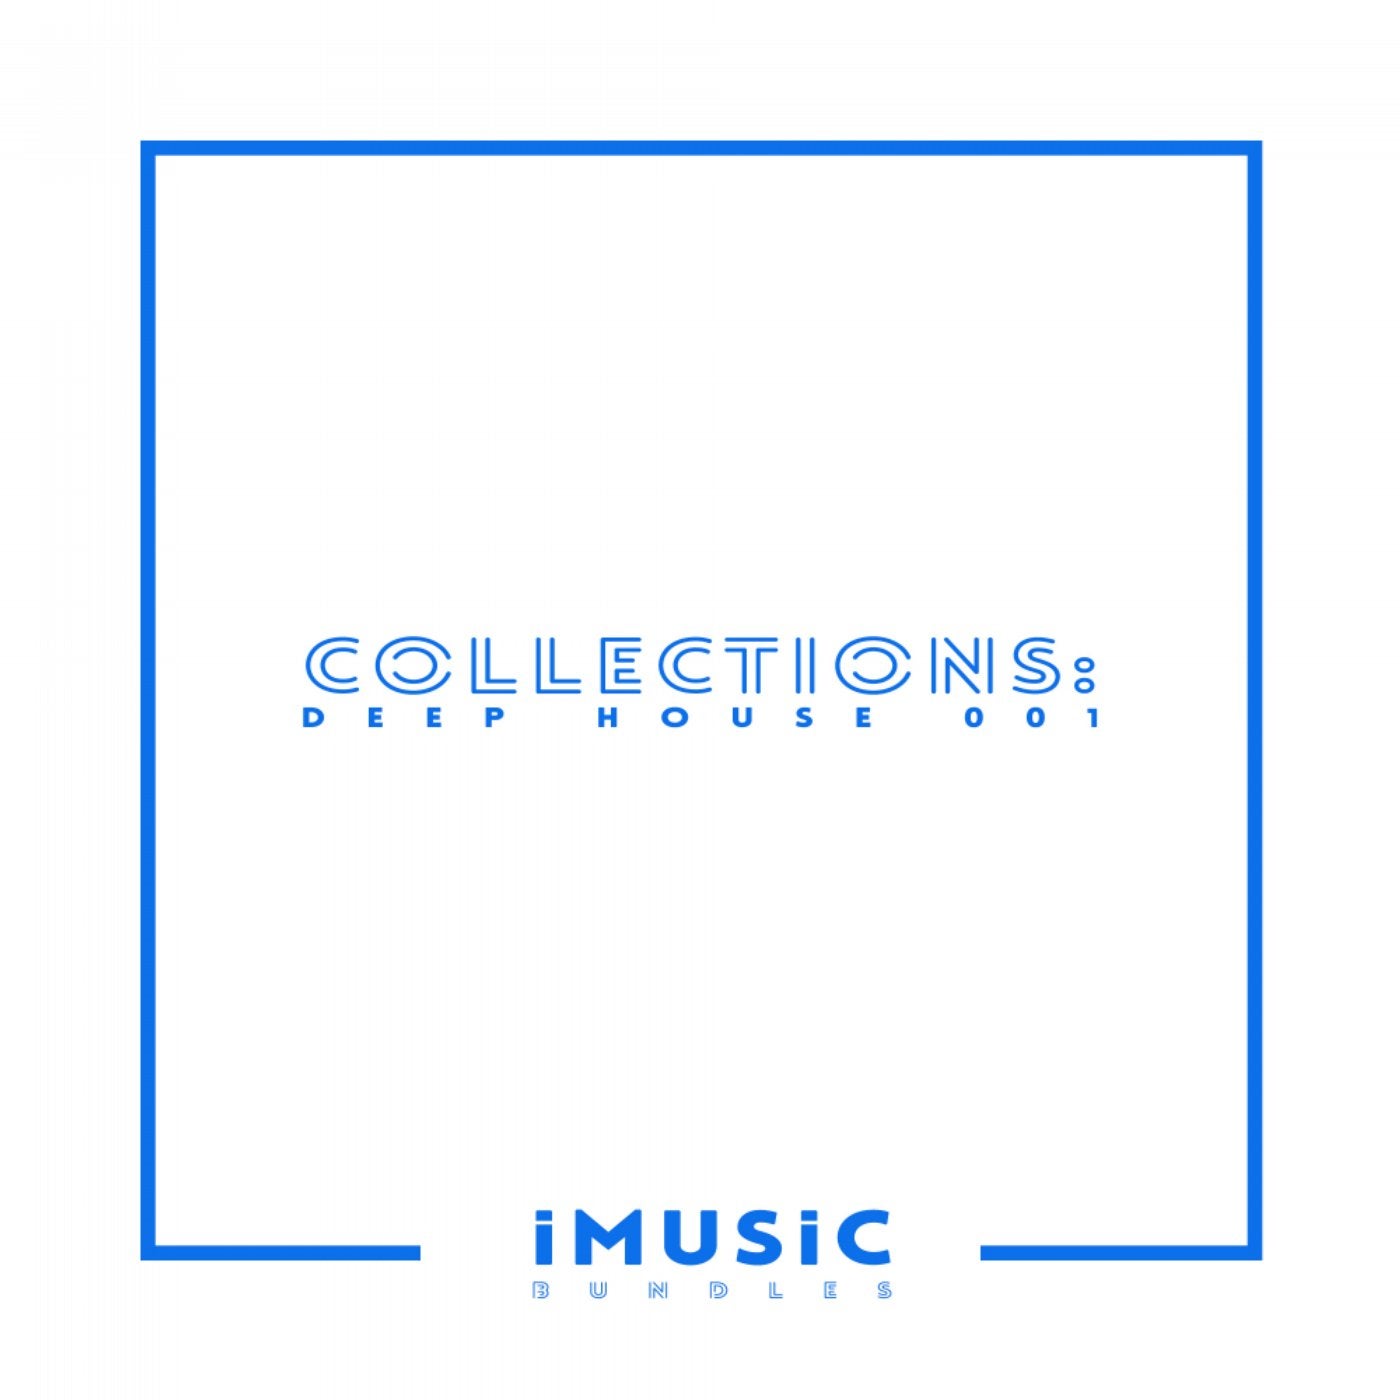 Collections: Deep House 001